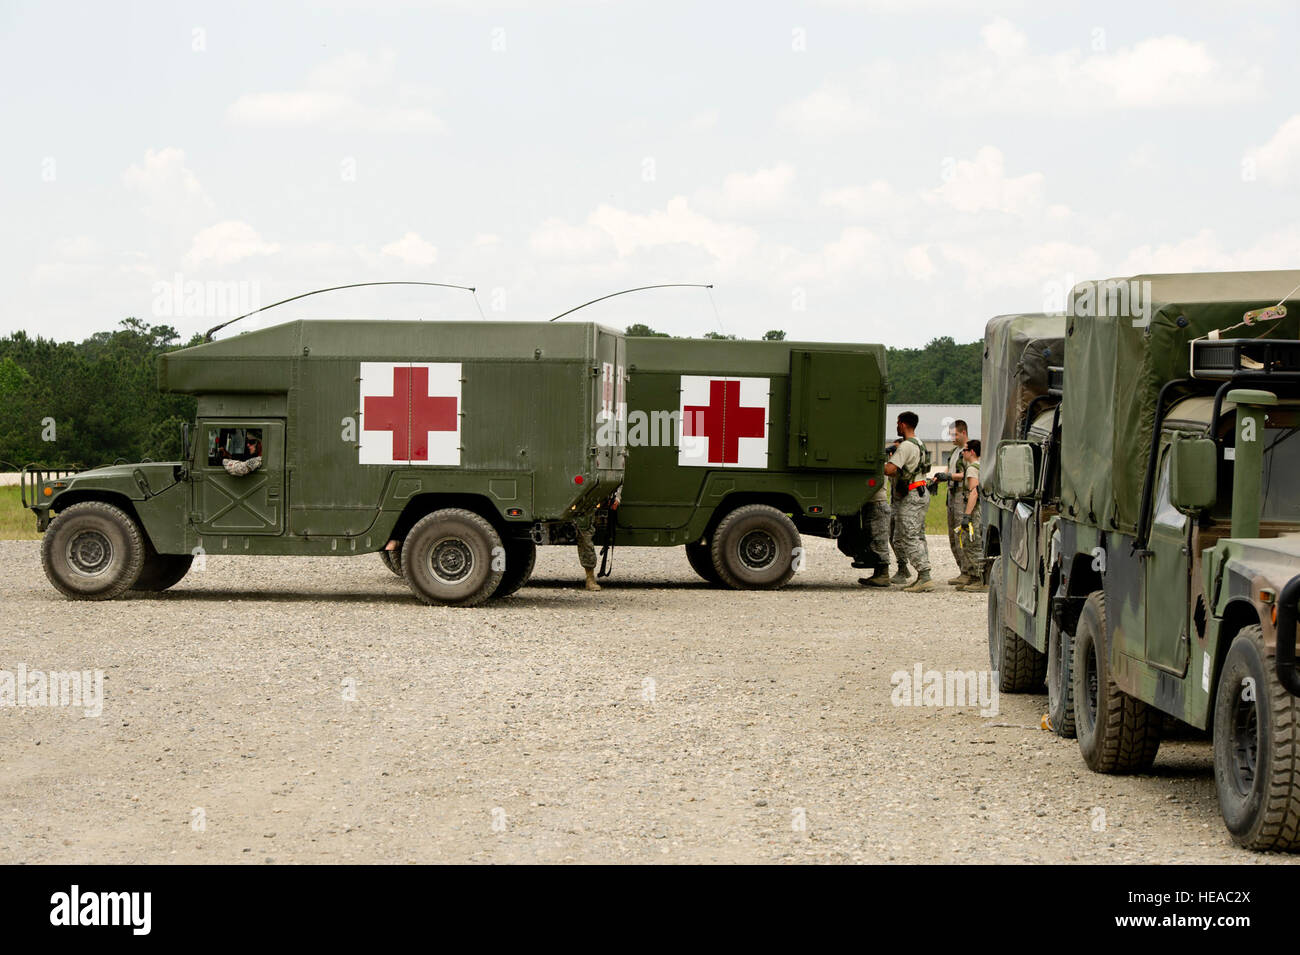 U.S. Army M997 High Mobility Multi-Purpose Wheeled Vehicle Ambulances sit in front of the Mobile Aeromedical Staging Facility before delivering simulated patients during the joint service field exercise JRTC 12-06 at the Joint Readiness Training Center, Fort Polk, La., May 07, 2012. JRTC is designed to prepare and educate U.S. military Service members for deployments to the Middle East.  Staff Sgt. Matthew Smith Stock Photo